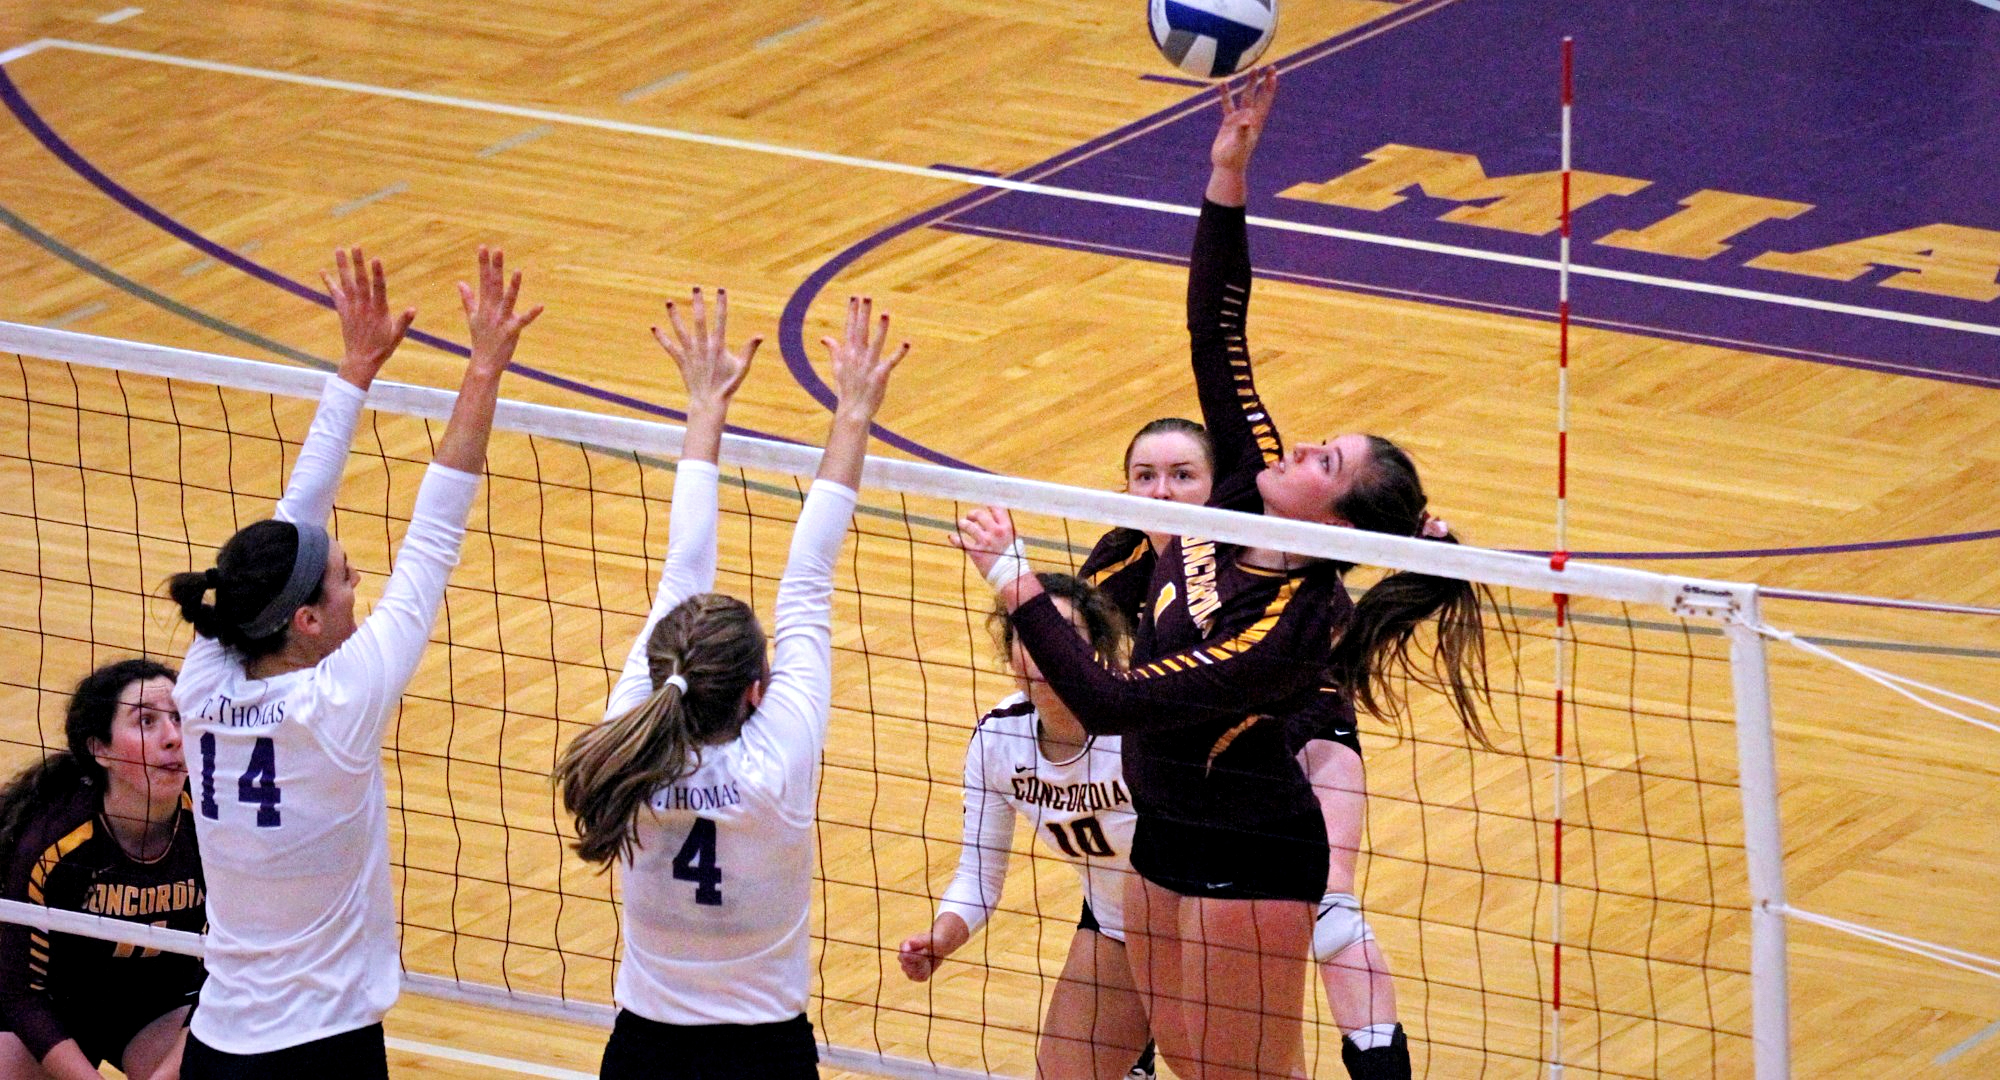 Senior Mandy Mercil goes up for one of her five kills in the Cobbers' MIAC playoff match at St. Thomas. (Pic courtesy of Haley Staffon - UST Sports Information)